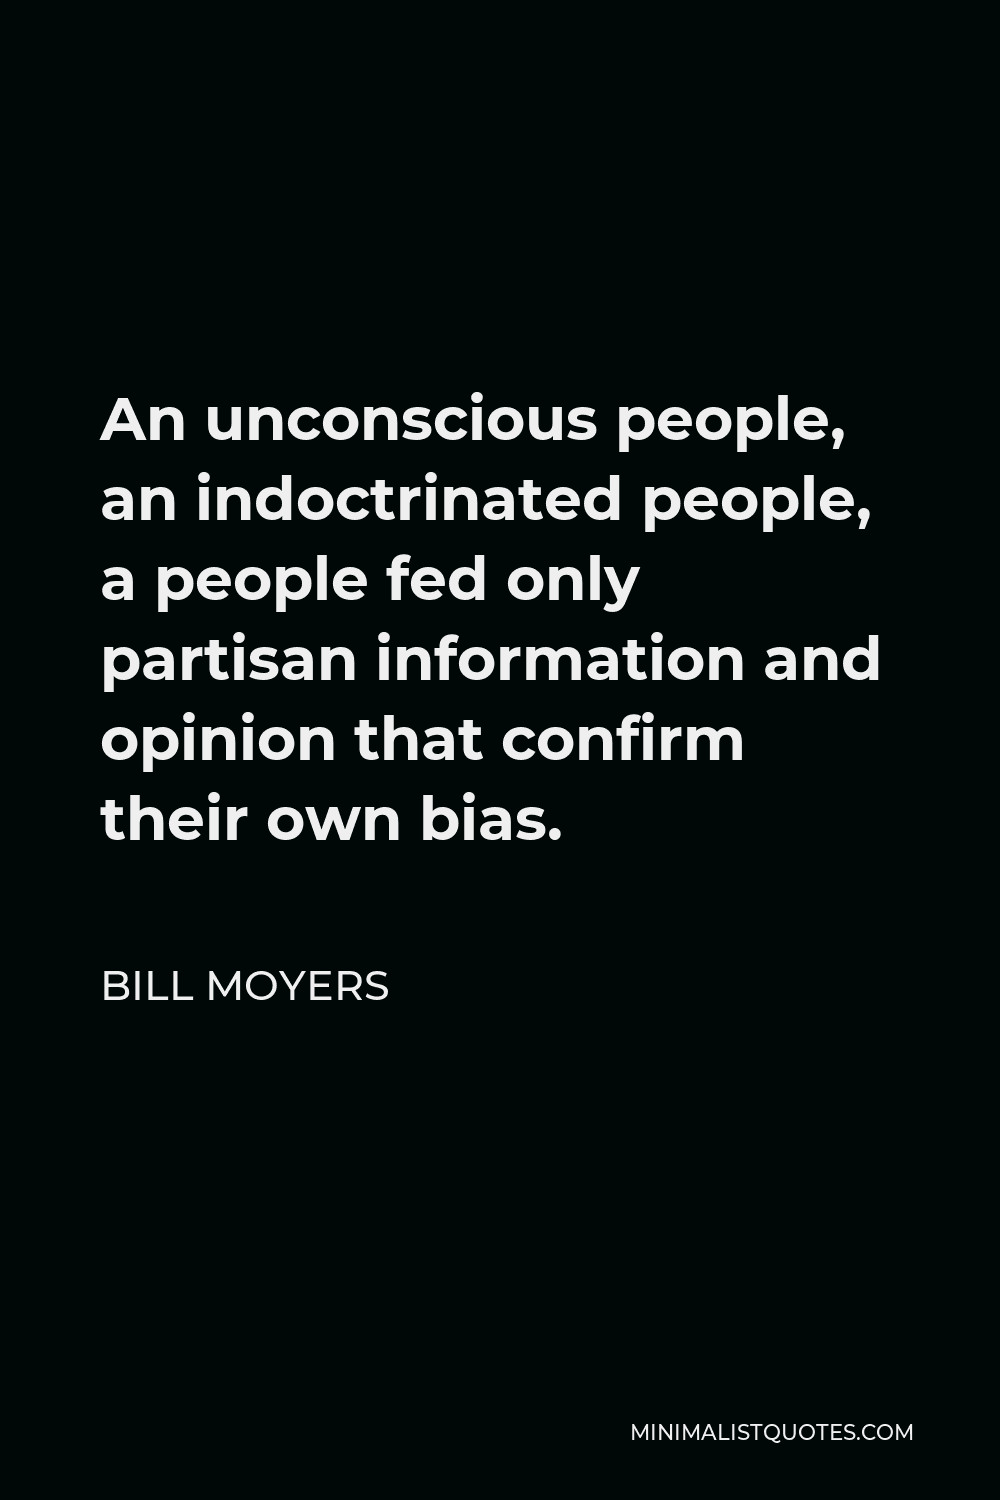 Bill Moyers Quote - An unconscious people, an indoctrinated people, a people fed only partisan information and opinion that confirm their own bias.